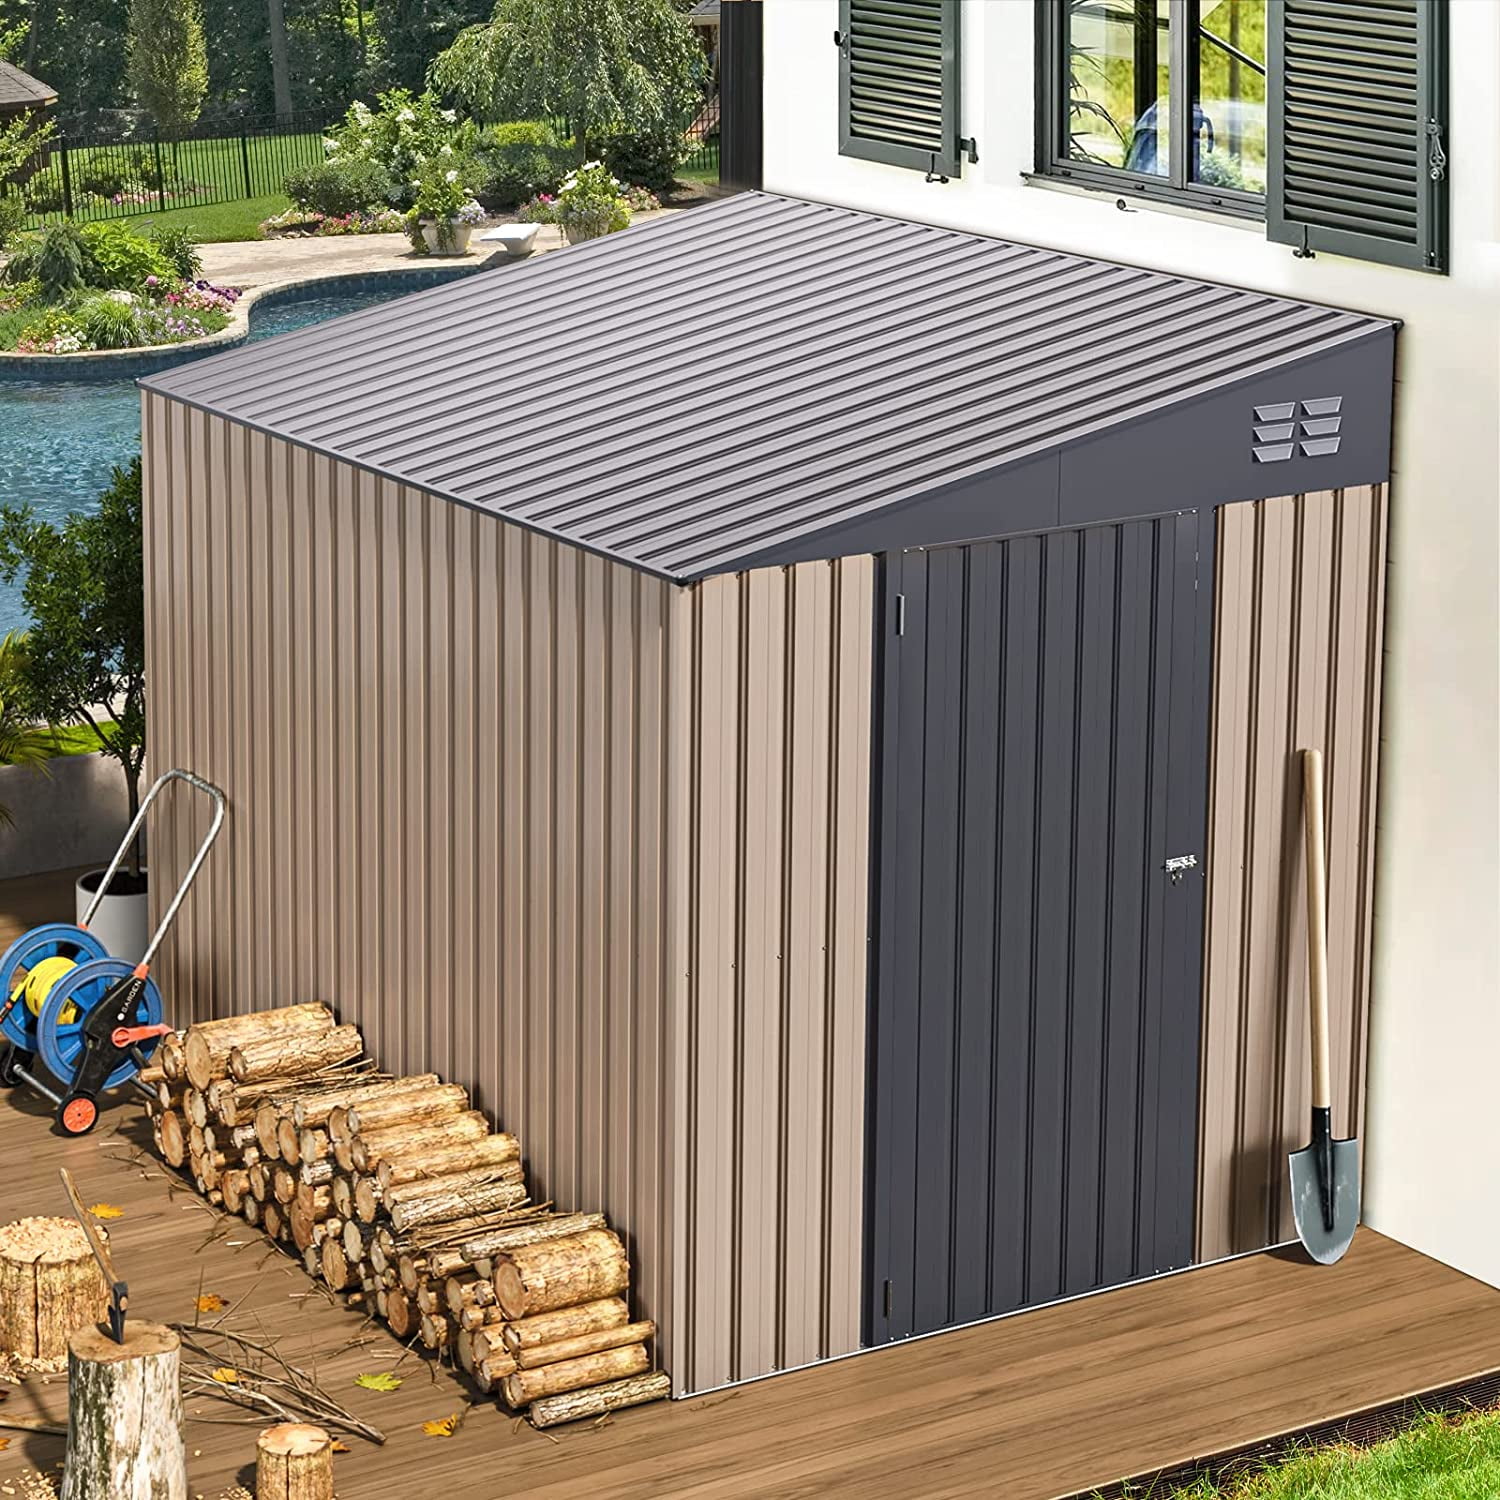 8×6FT Outdoor Storage Shed, Sheds & Outdoor Storage Clearance, Backyard  Metal shed with Lockable Double Doors, can be Used as Bicycle shed, Garden